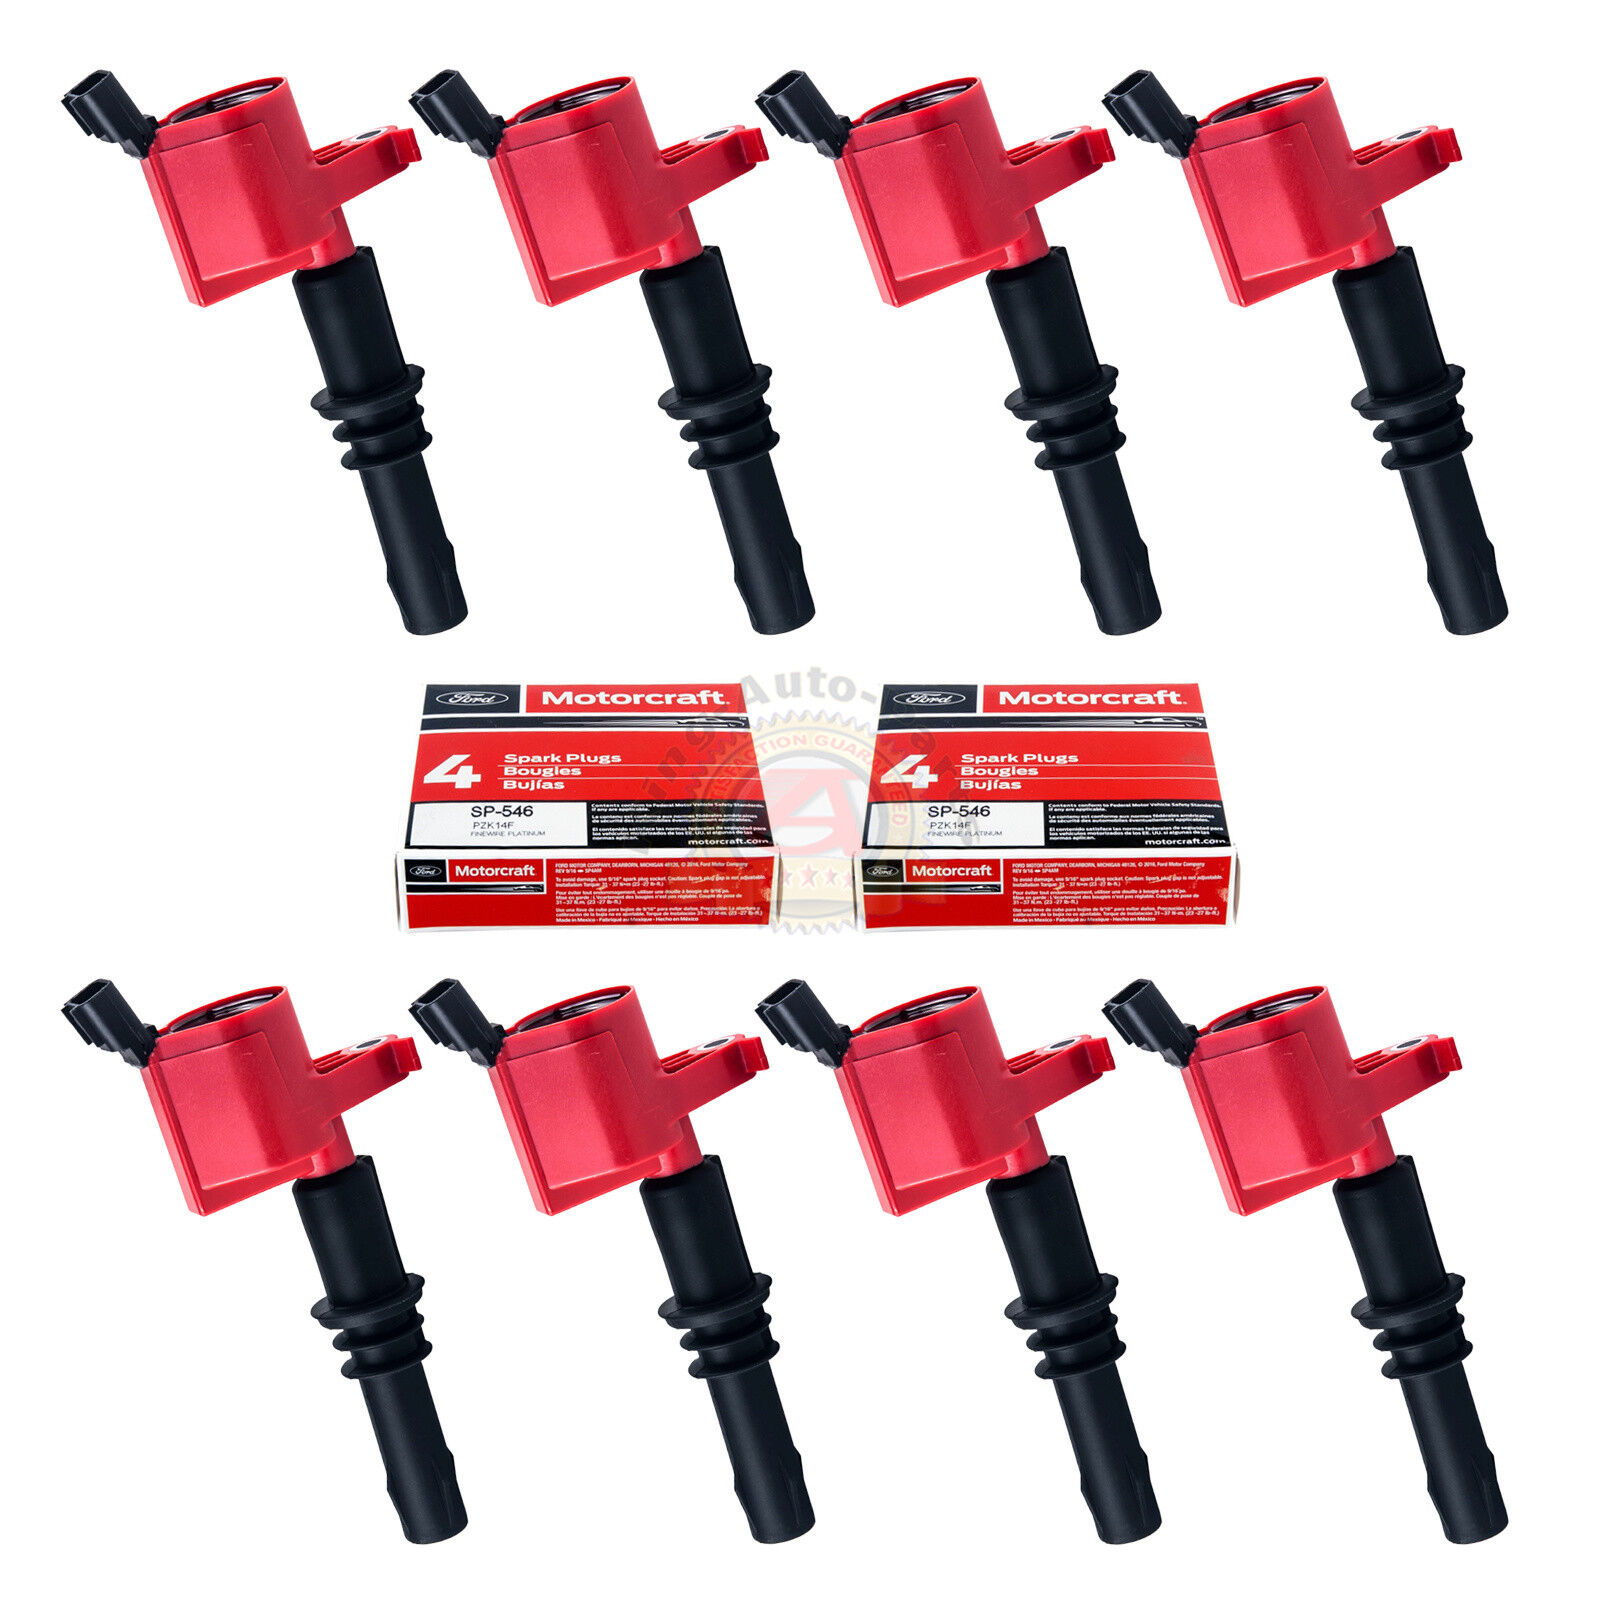 8pc High Performance Red Ignition Coils and Motorcraft Spark Plug For Ford F-150